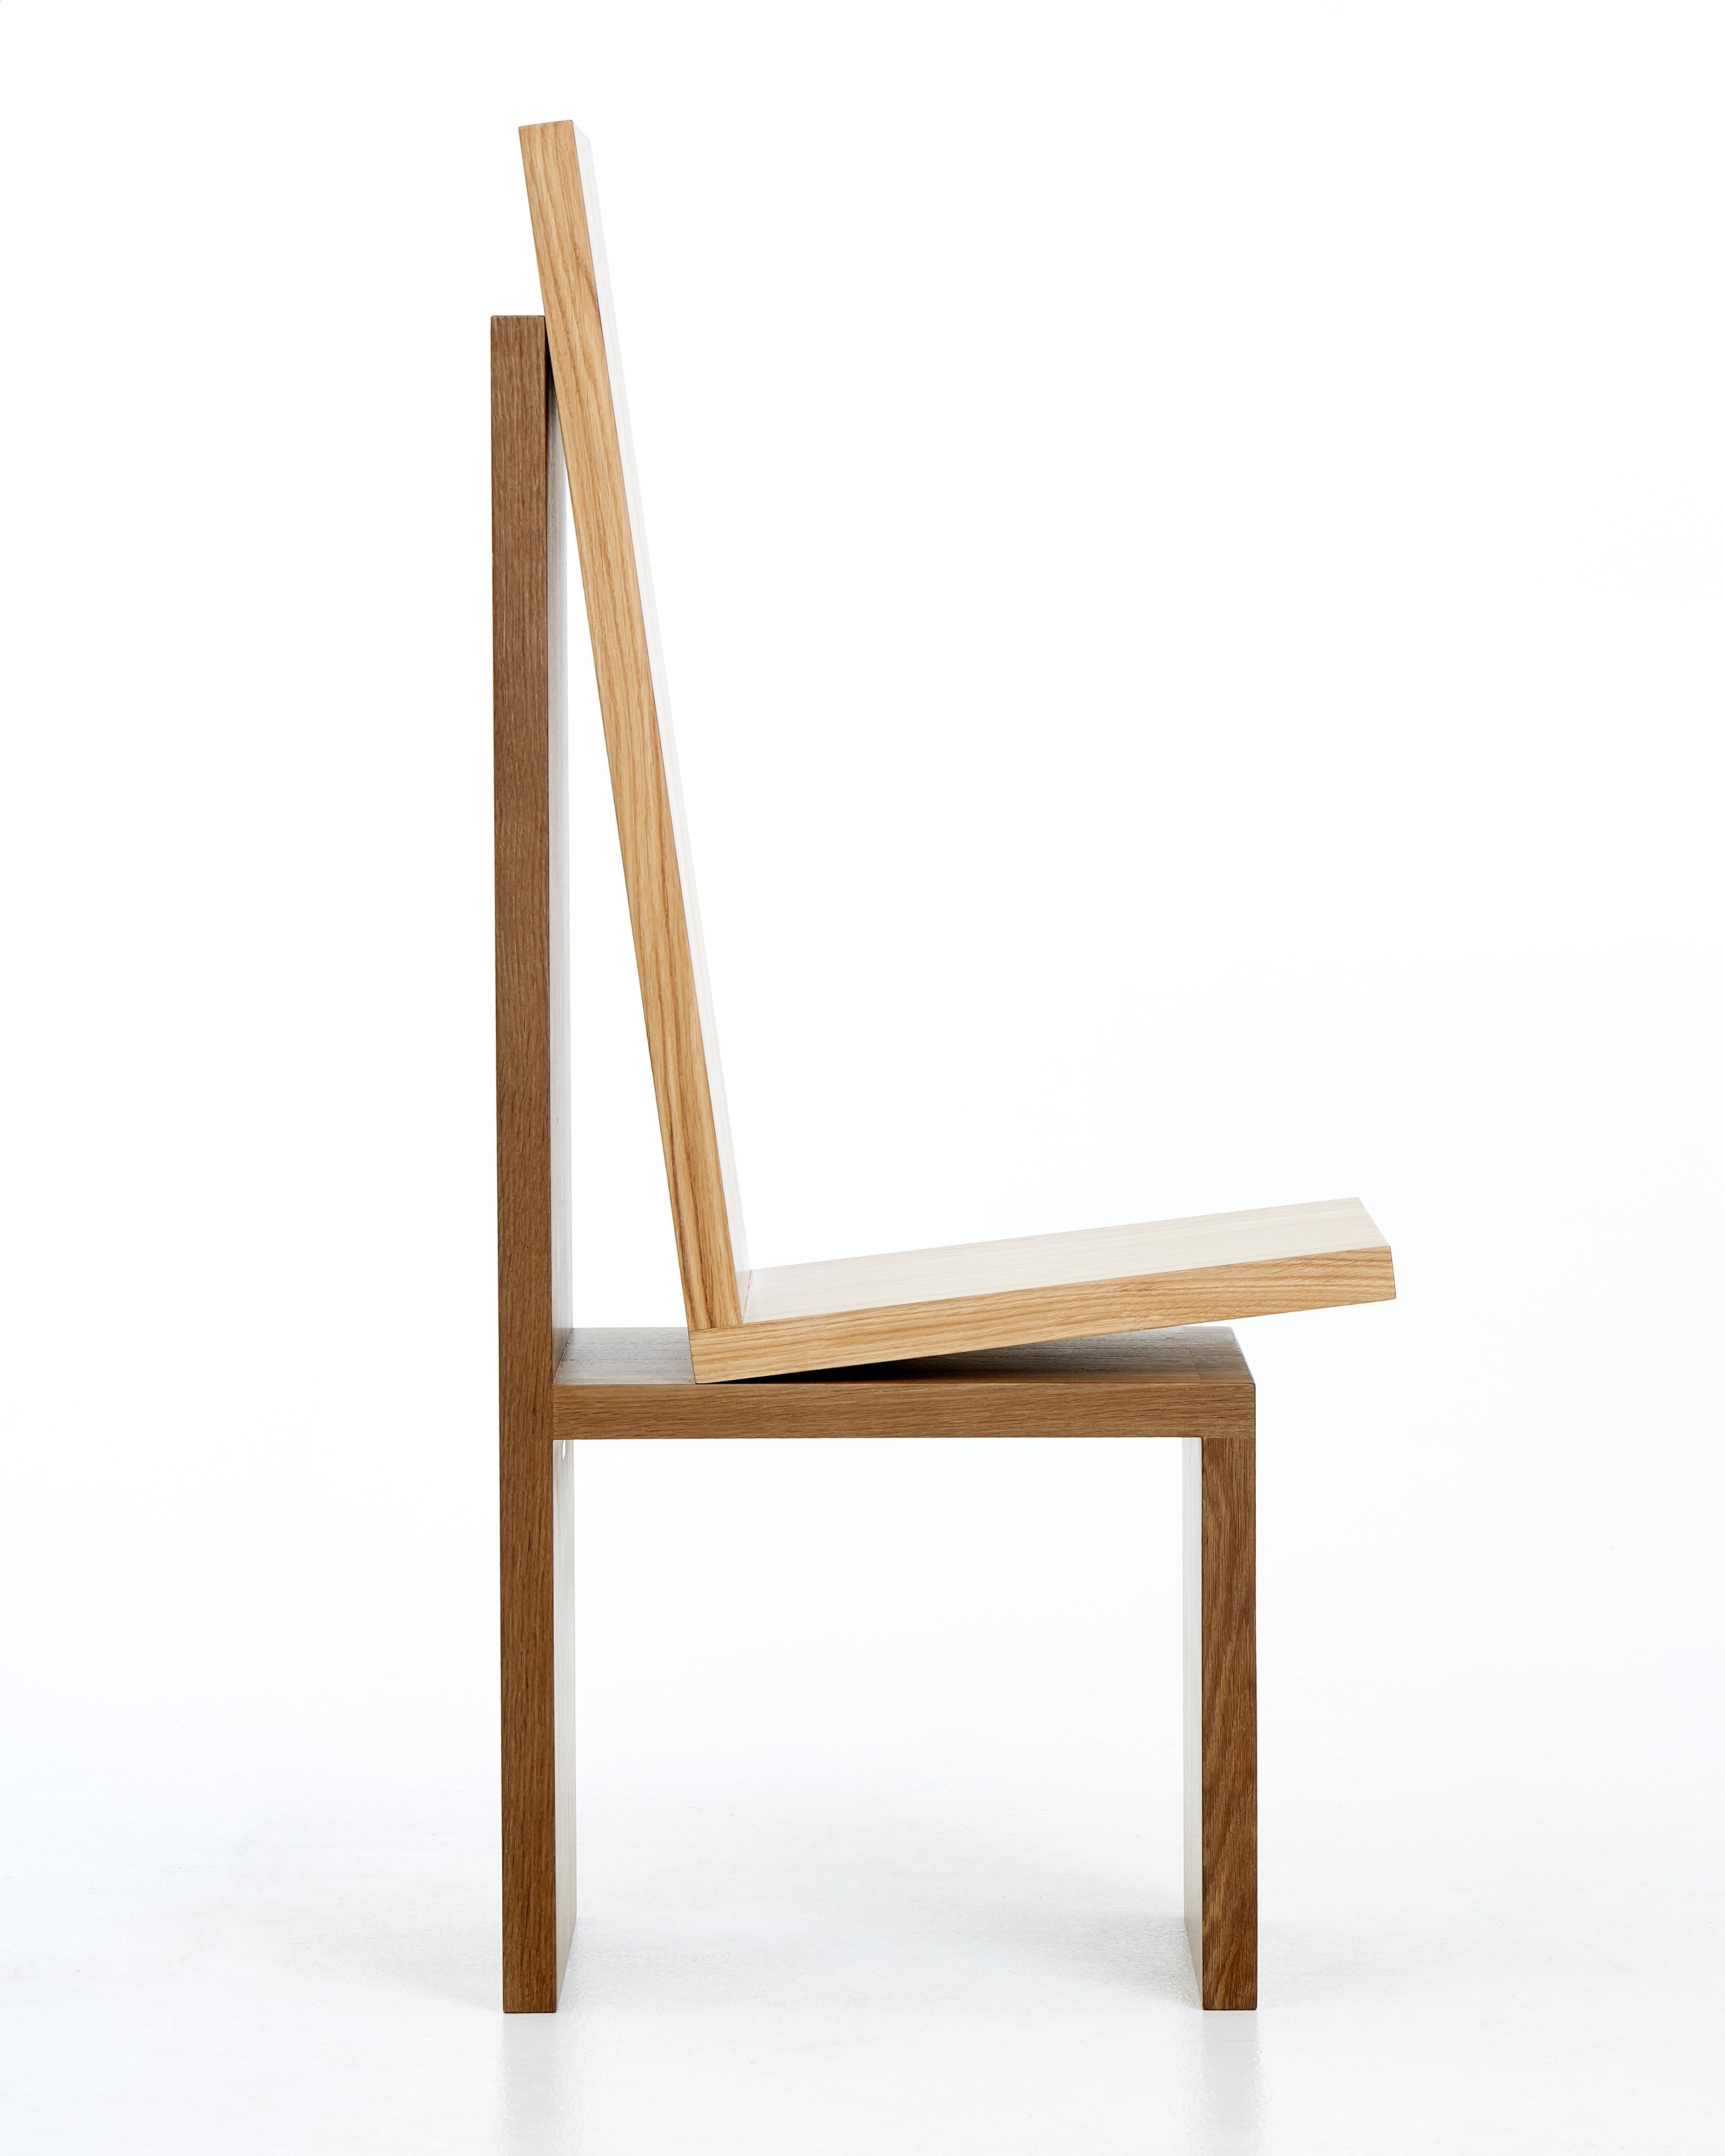 Sculptural solid oak dining chair made with no metal. Good back support, comfortable to seat. Minimum order 8 pieces, available in different finishes. 

Janis Straupe (1962), a Latvian craftsman, an artist and designer with 35 years of